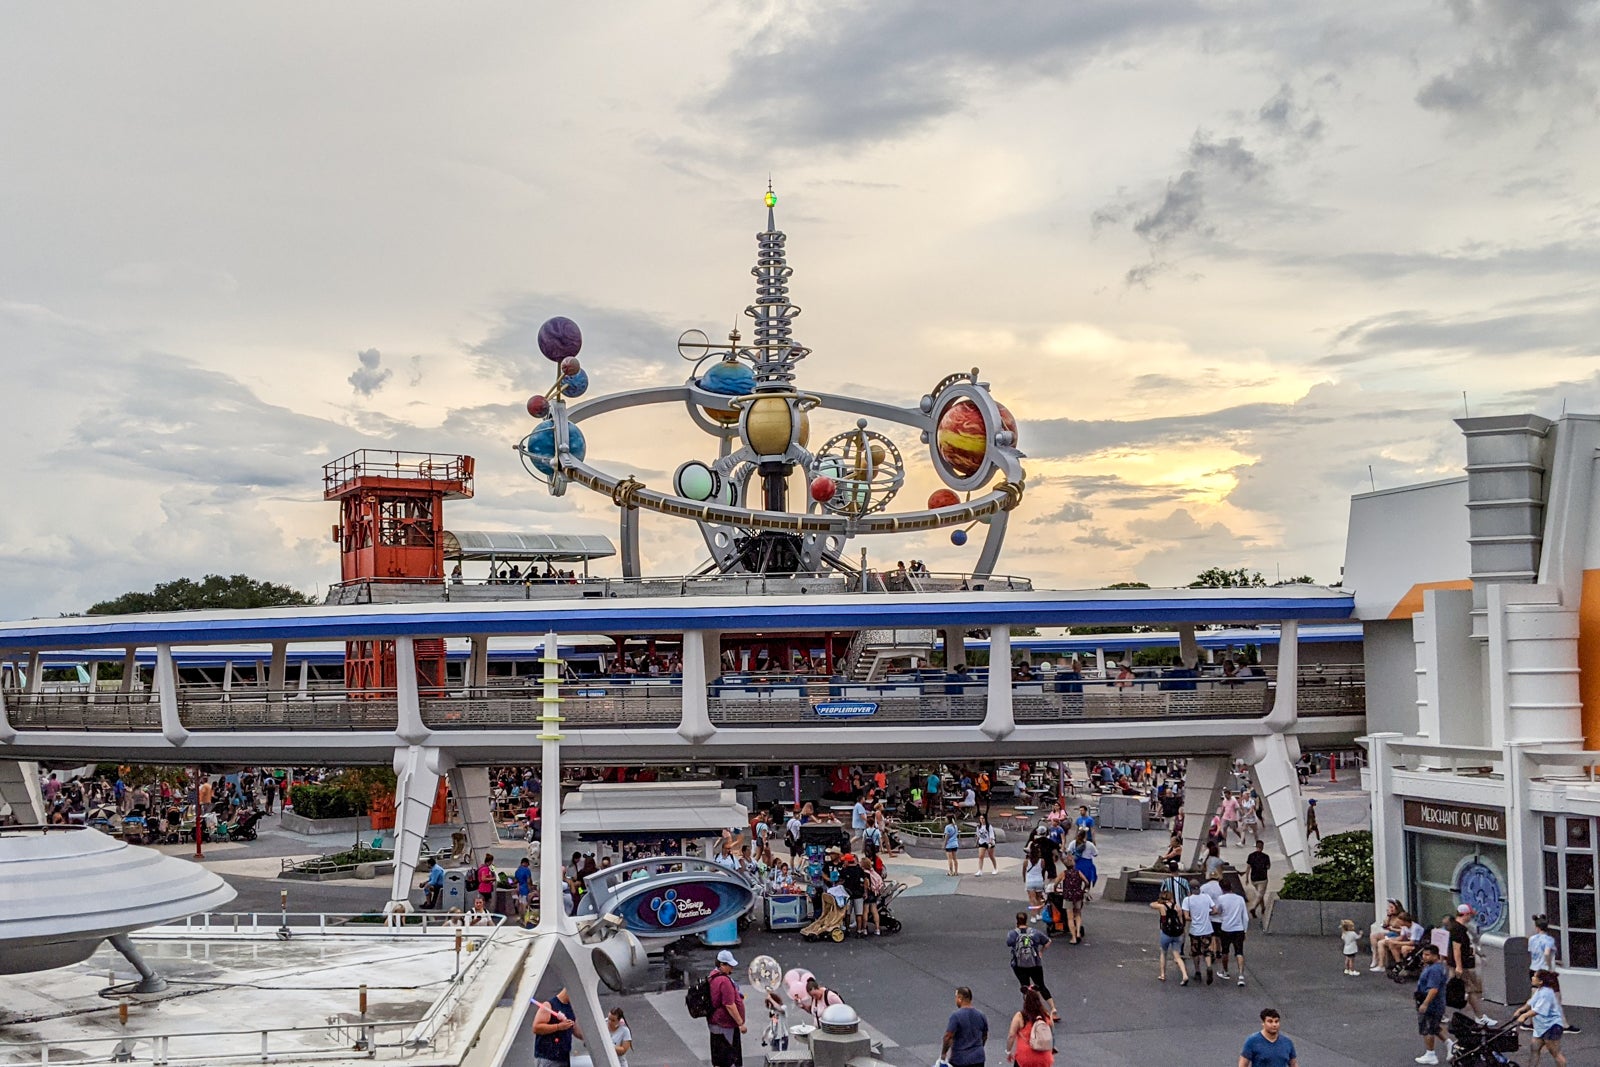 Views from the Tomorrowland Transit Authority PeopleMover